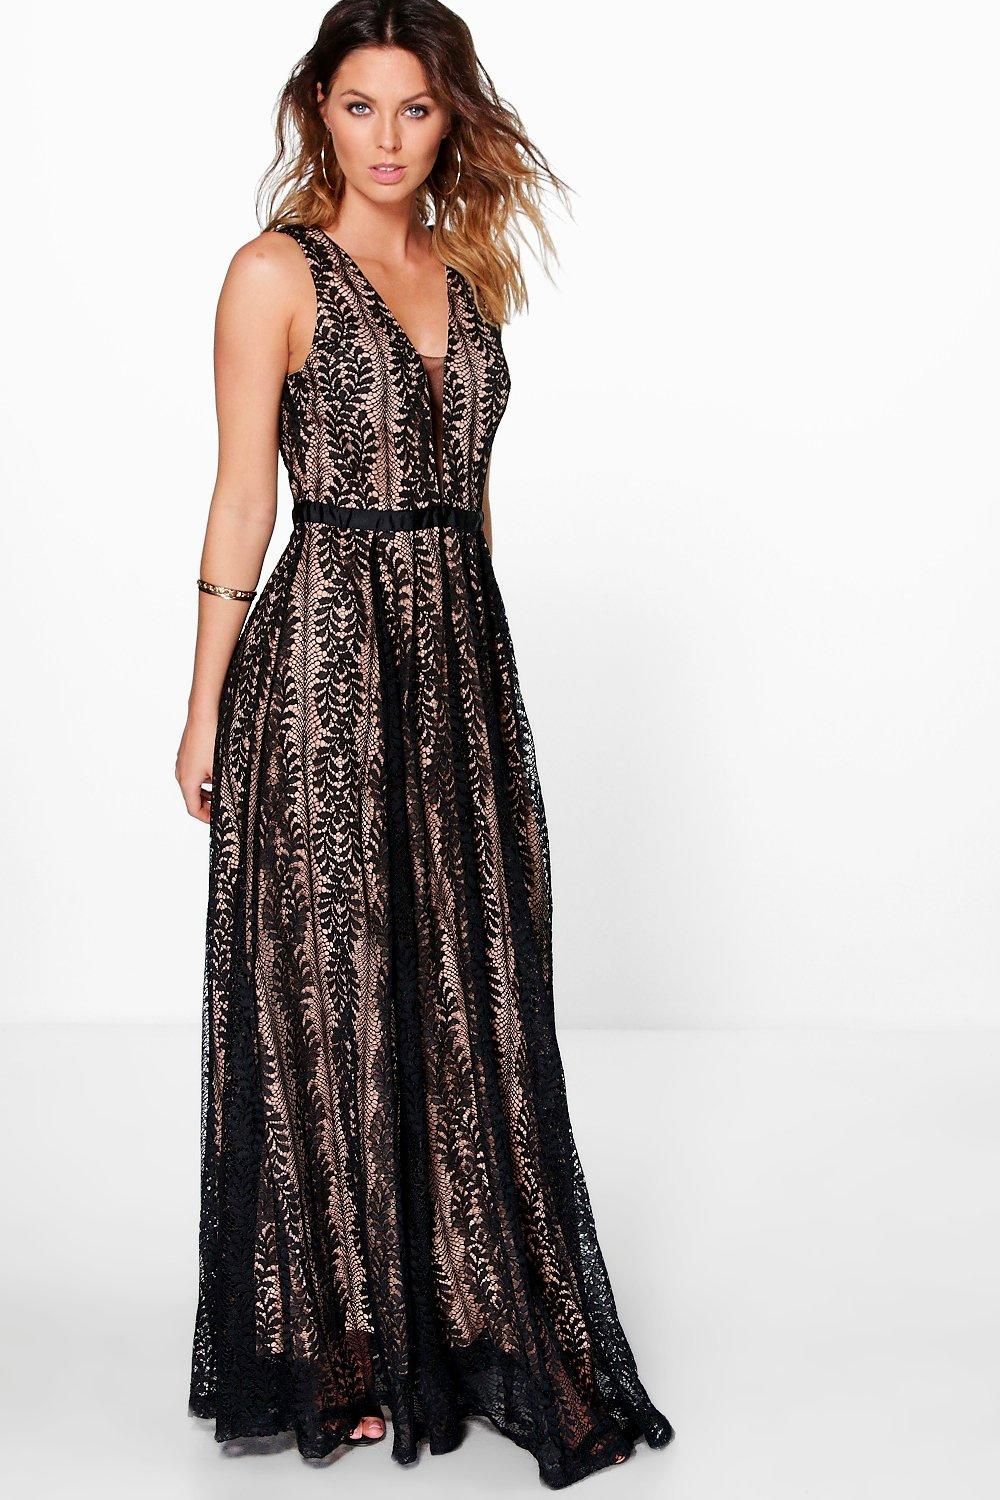 Tousled hair blonde model in lace overlay black maxi dress with plunge neckline